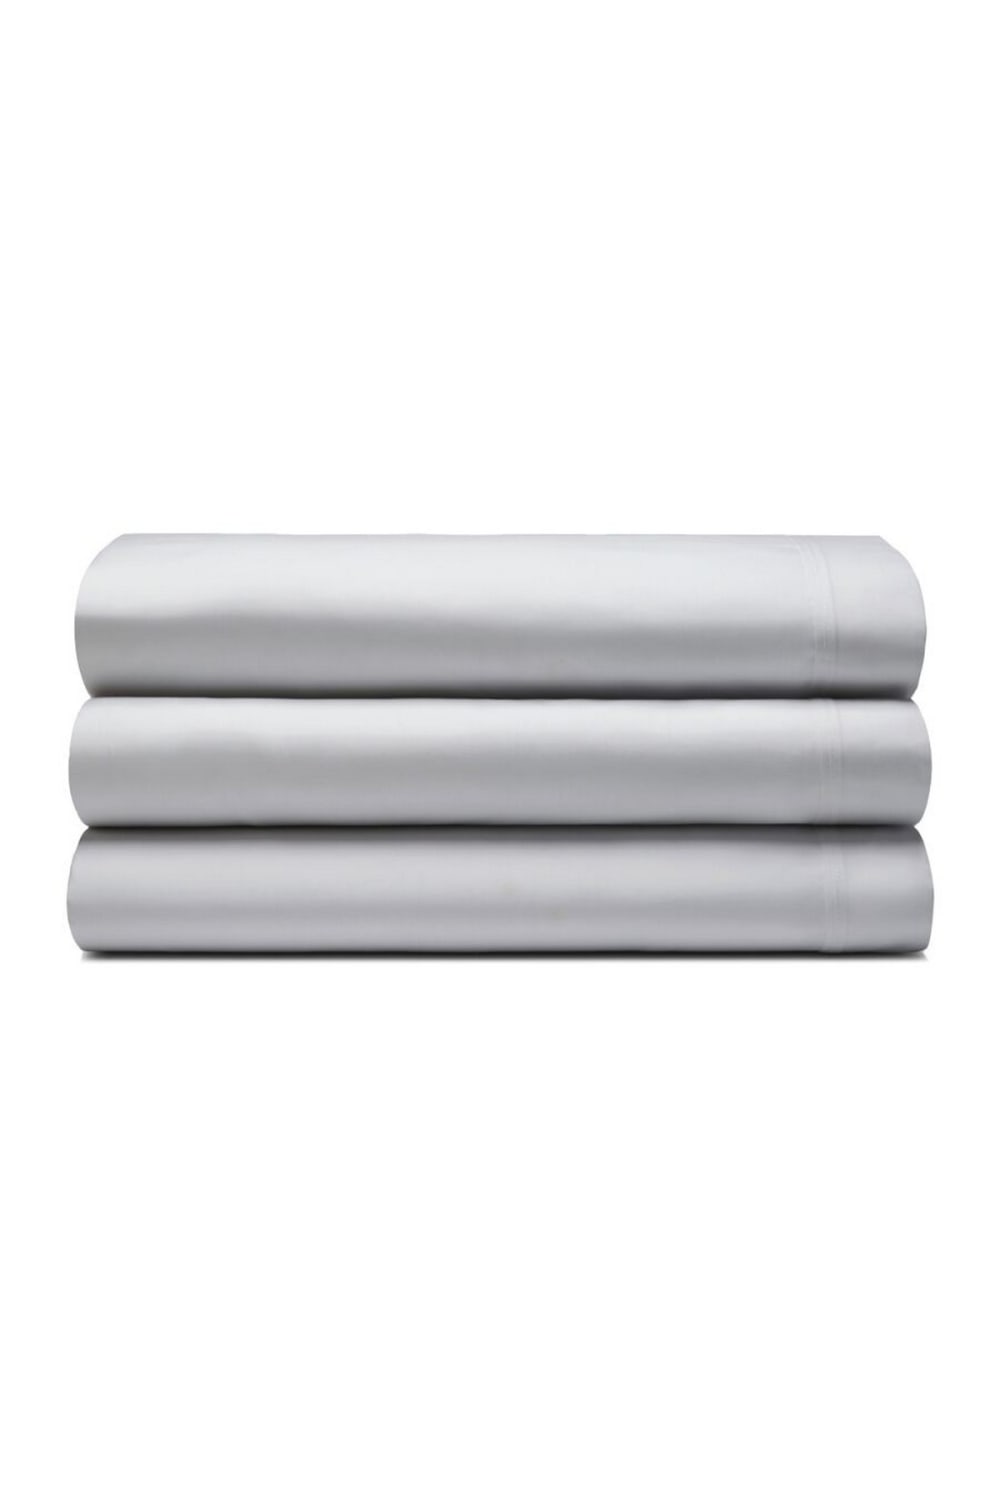 Egyptian Cotton Blend Fitted Sheet Ivory - Full/UK - Double